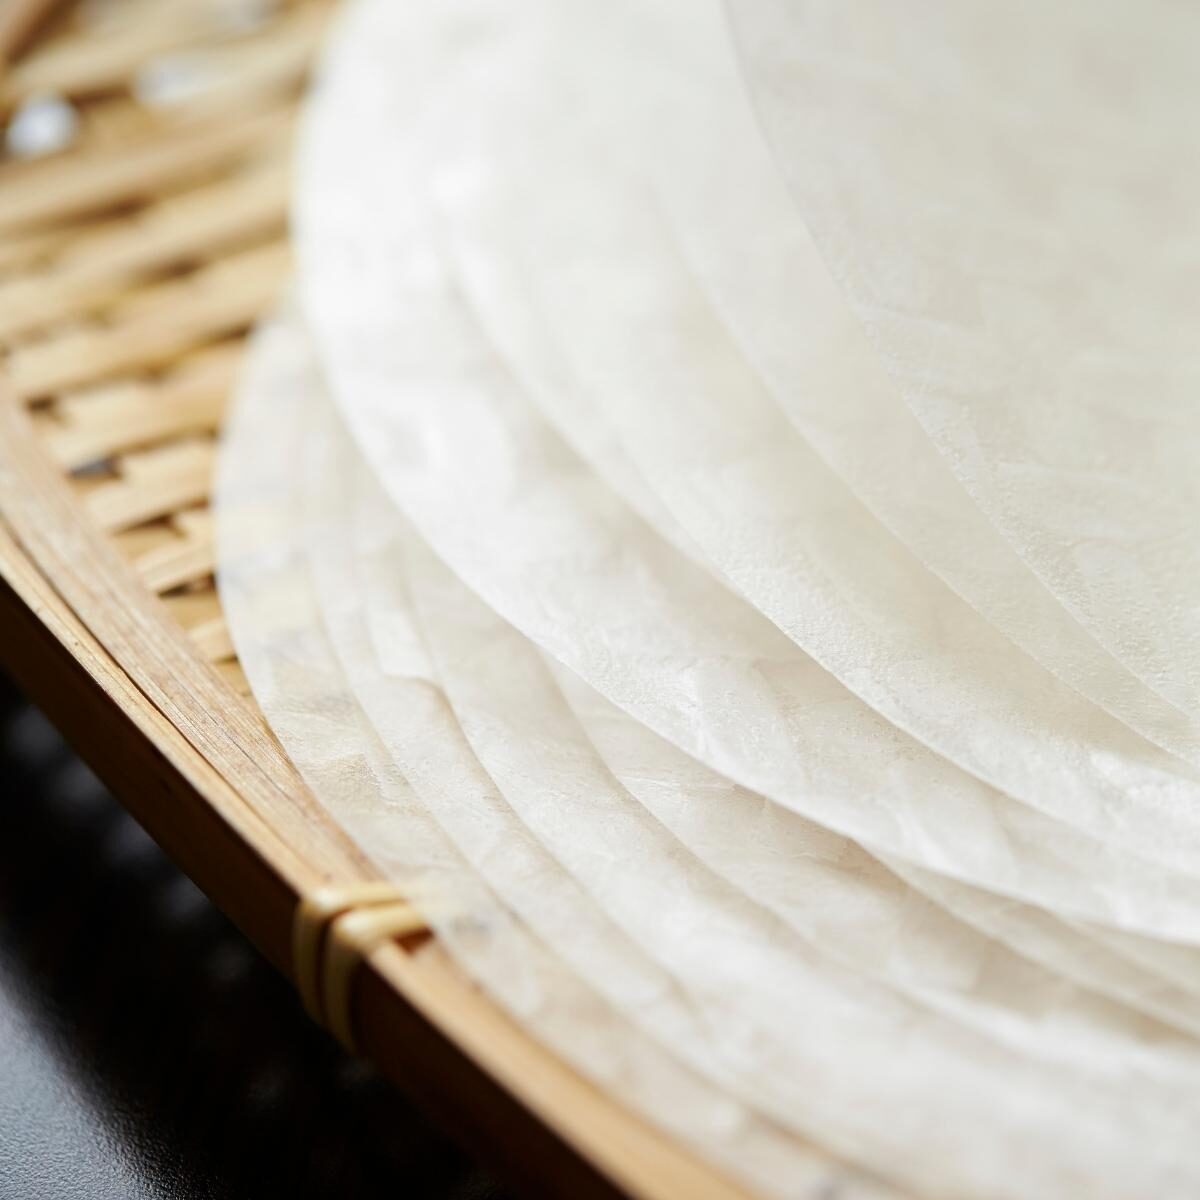 Pile of round rice paper wrappers on a bamboo tray.